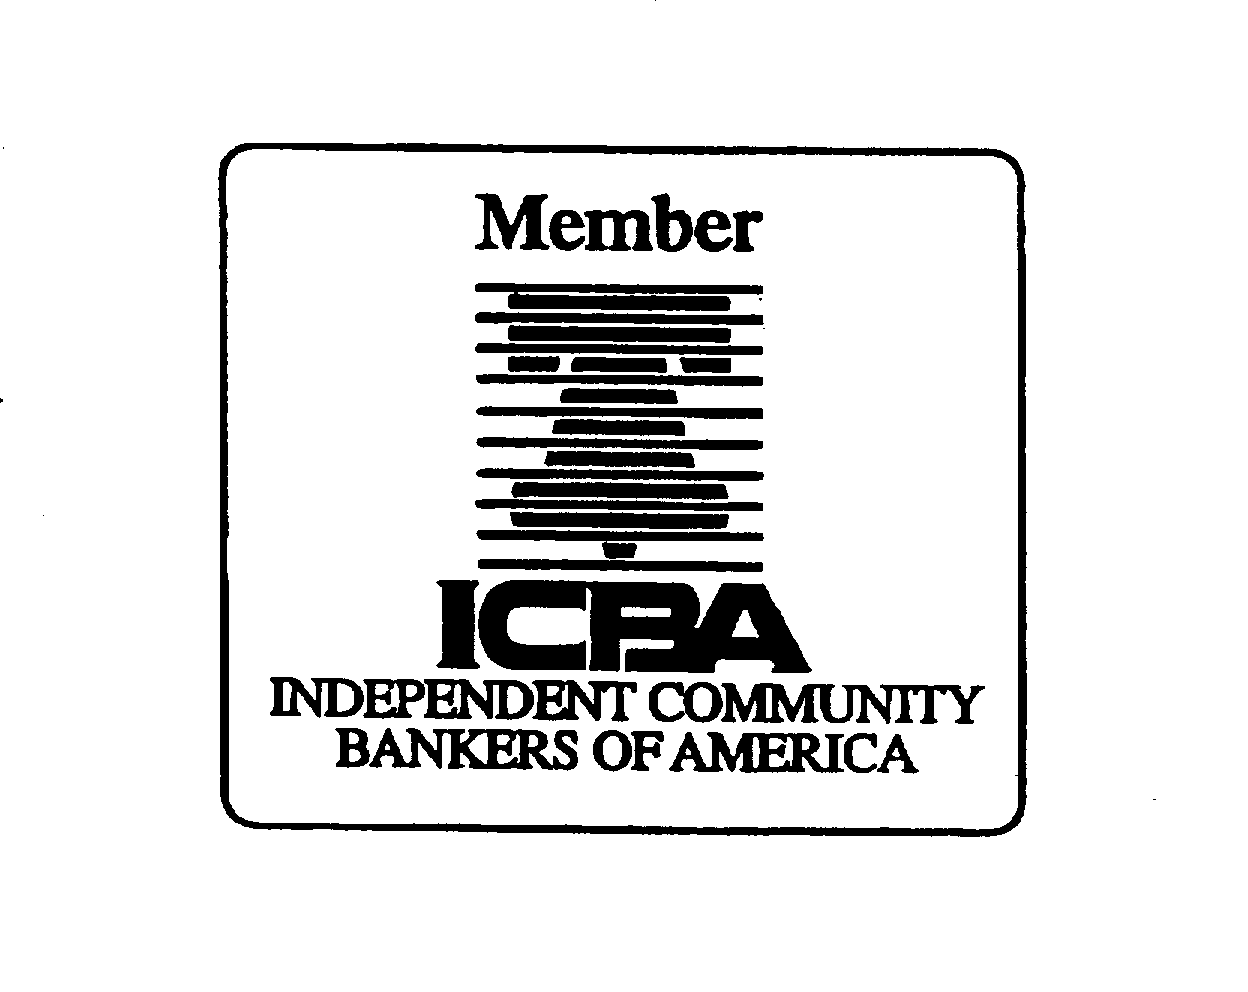  MEMBER ICBA INDEPENDENT COMMUNITY BANKERS OF AMERICA